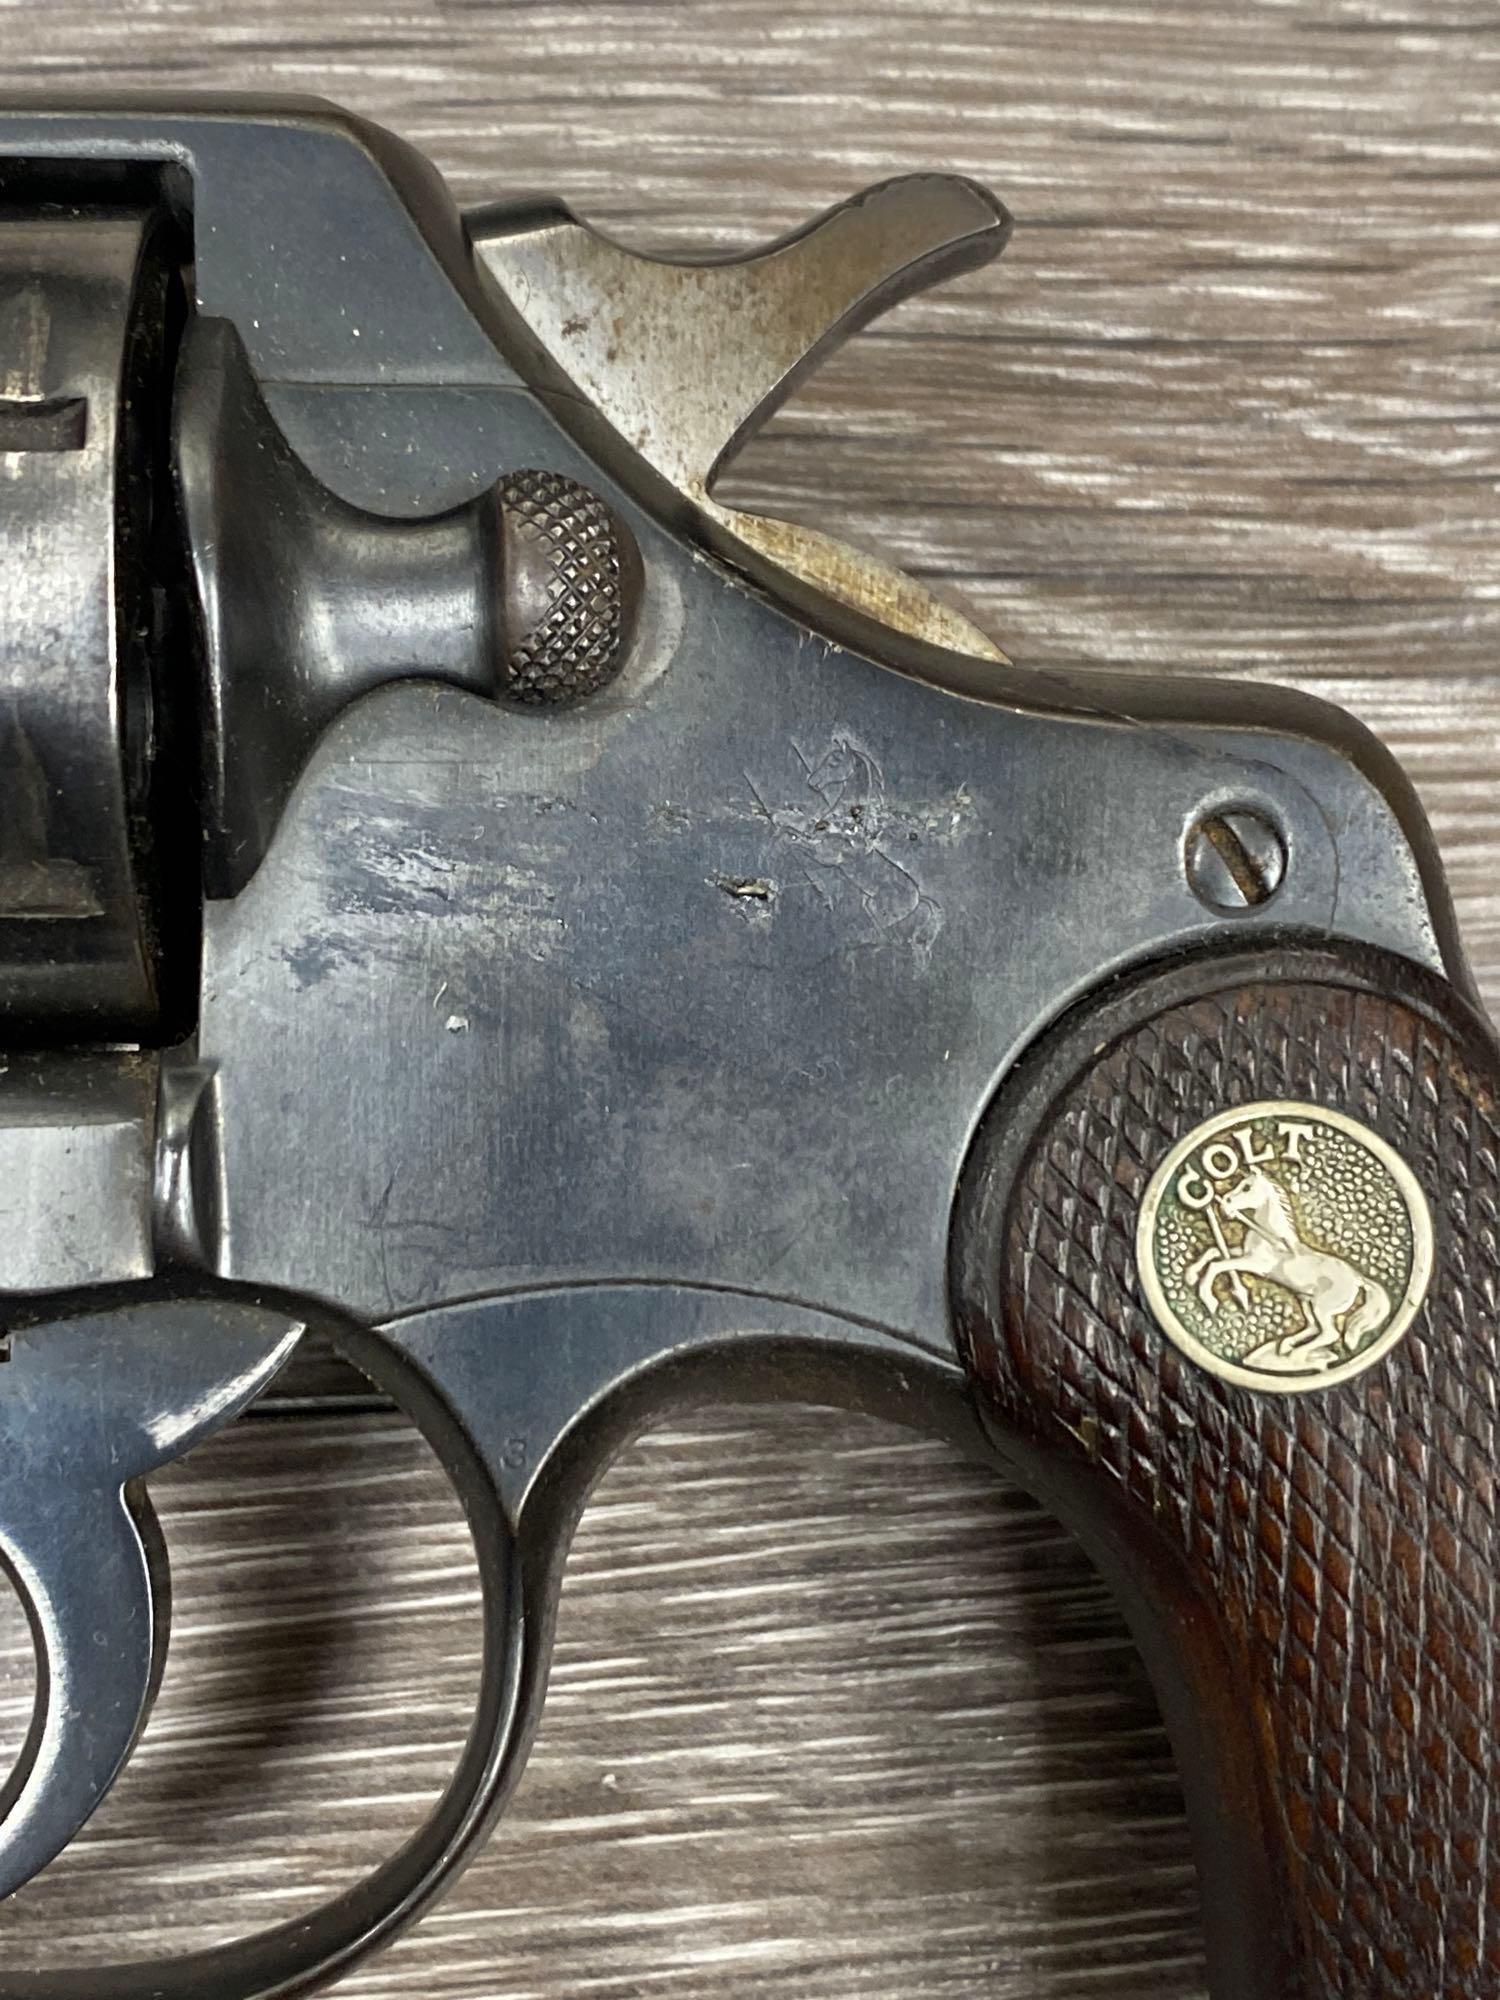 St. LOUIS PD MARKED COLT ARMY SPECIAL DOUBLE ACTION REVOLVER .38 SPECIAL CAL.